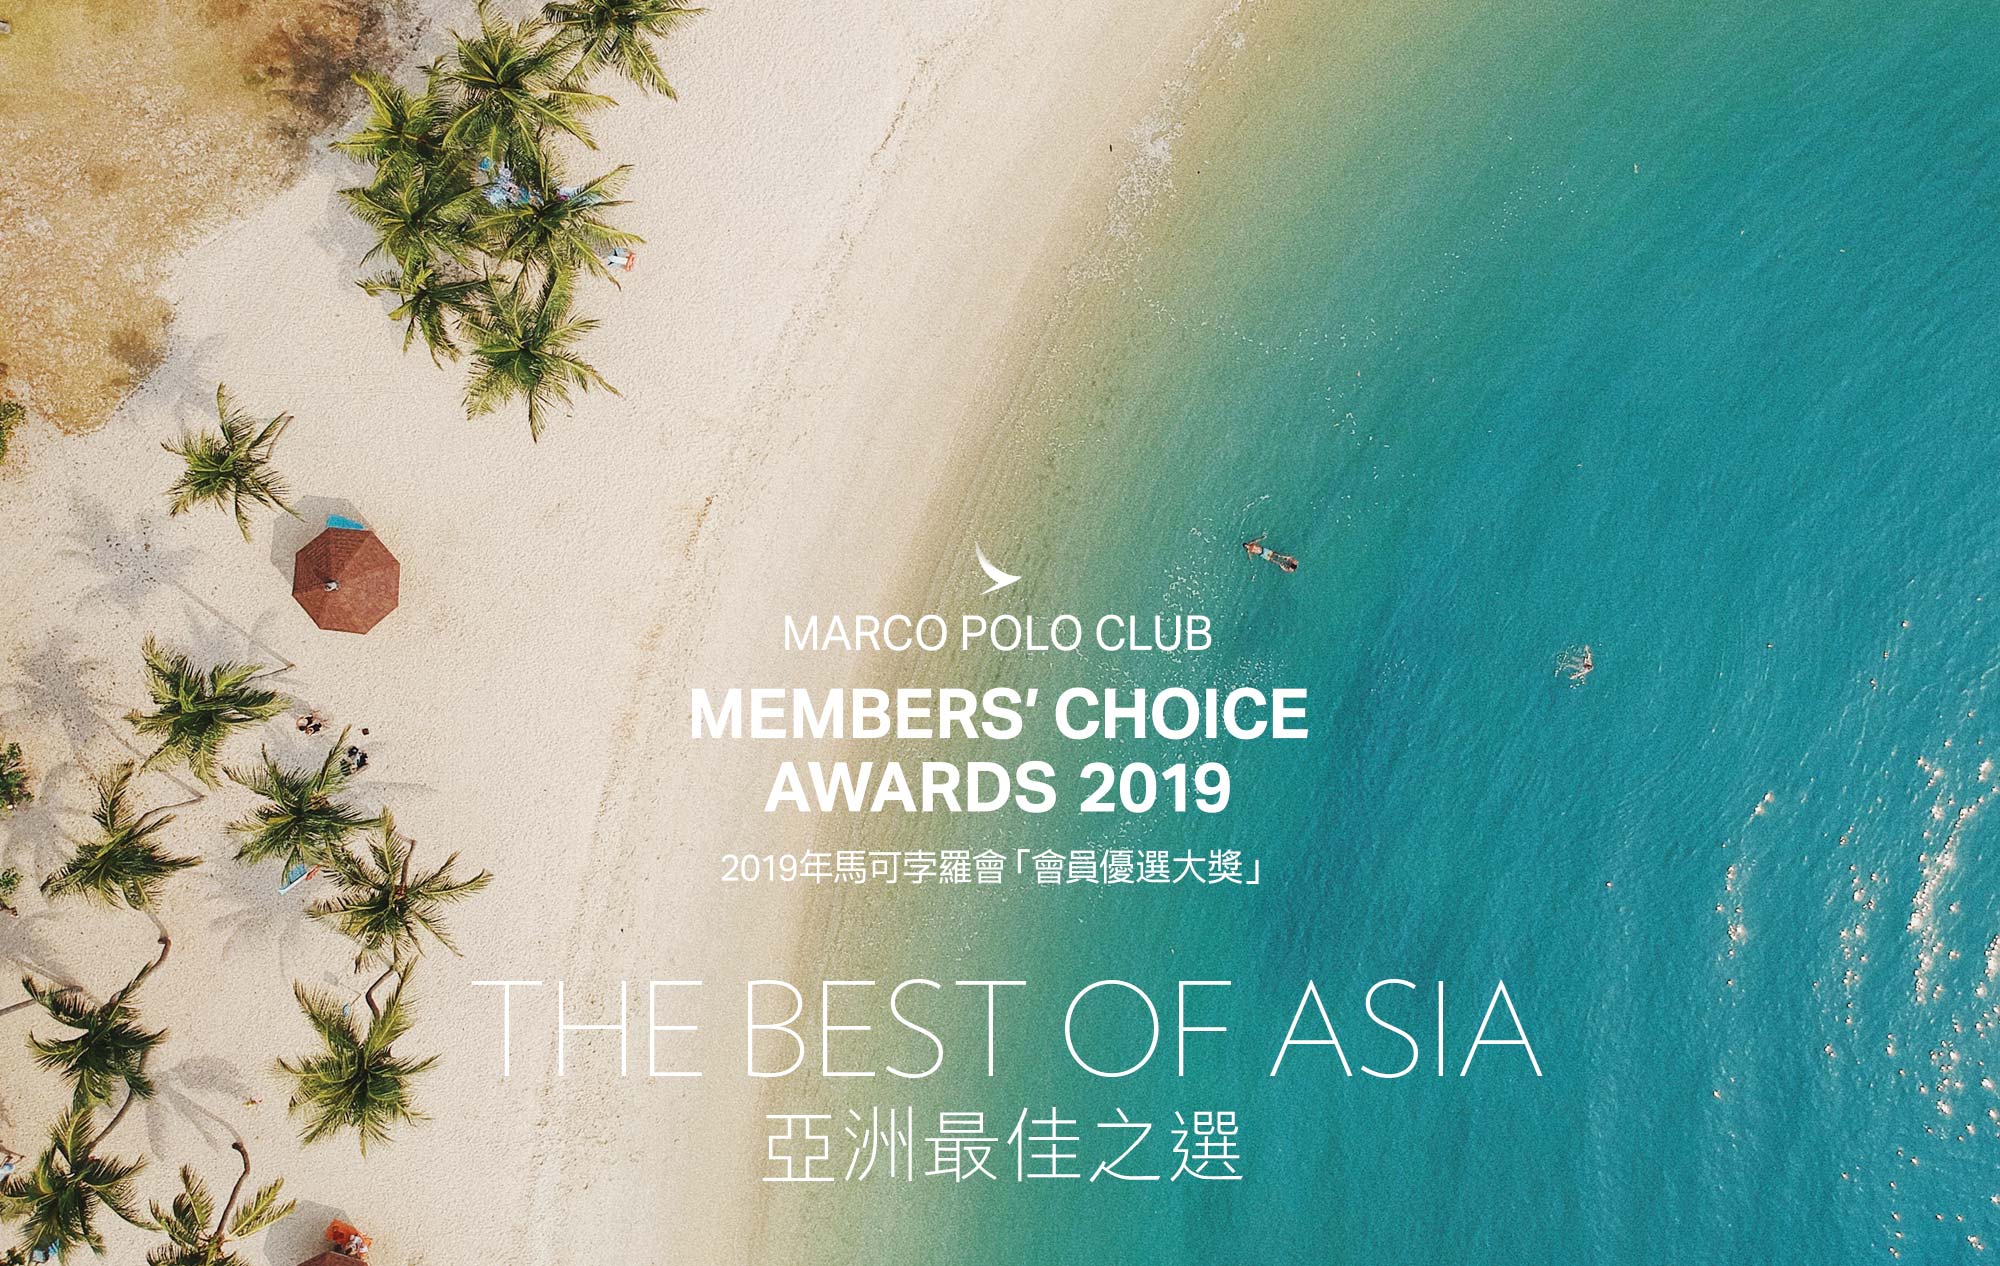 Marco Polo Club Members' Choice Awards 2019 best of Asia